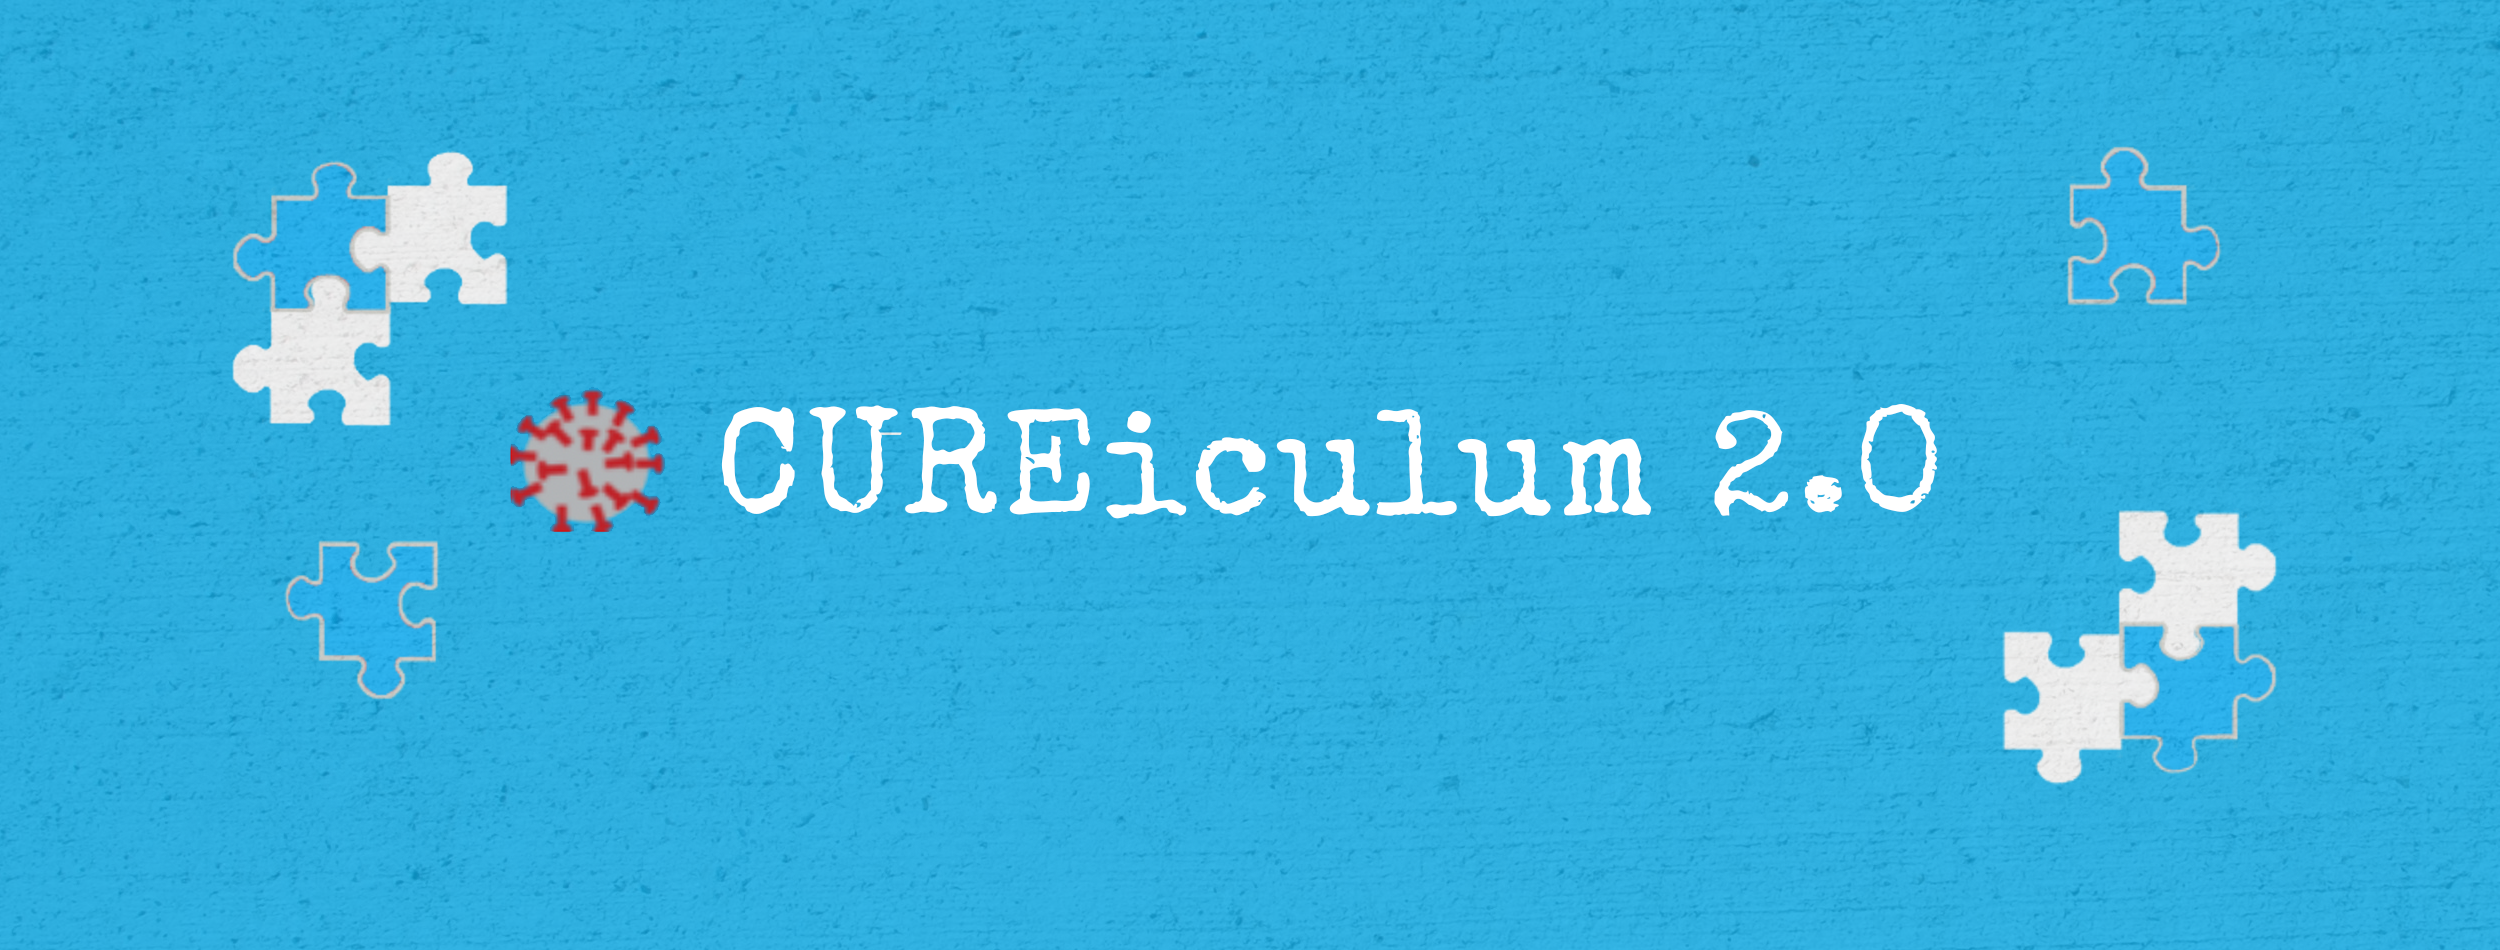 blue image with white type that reads CUREiculum 2.0